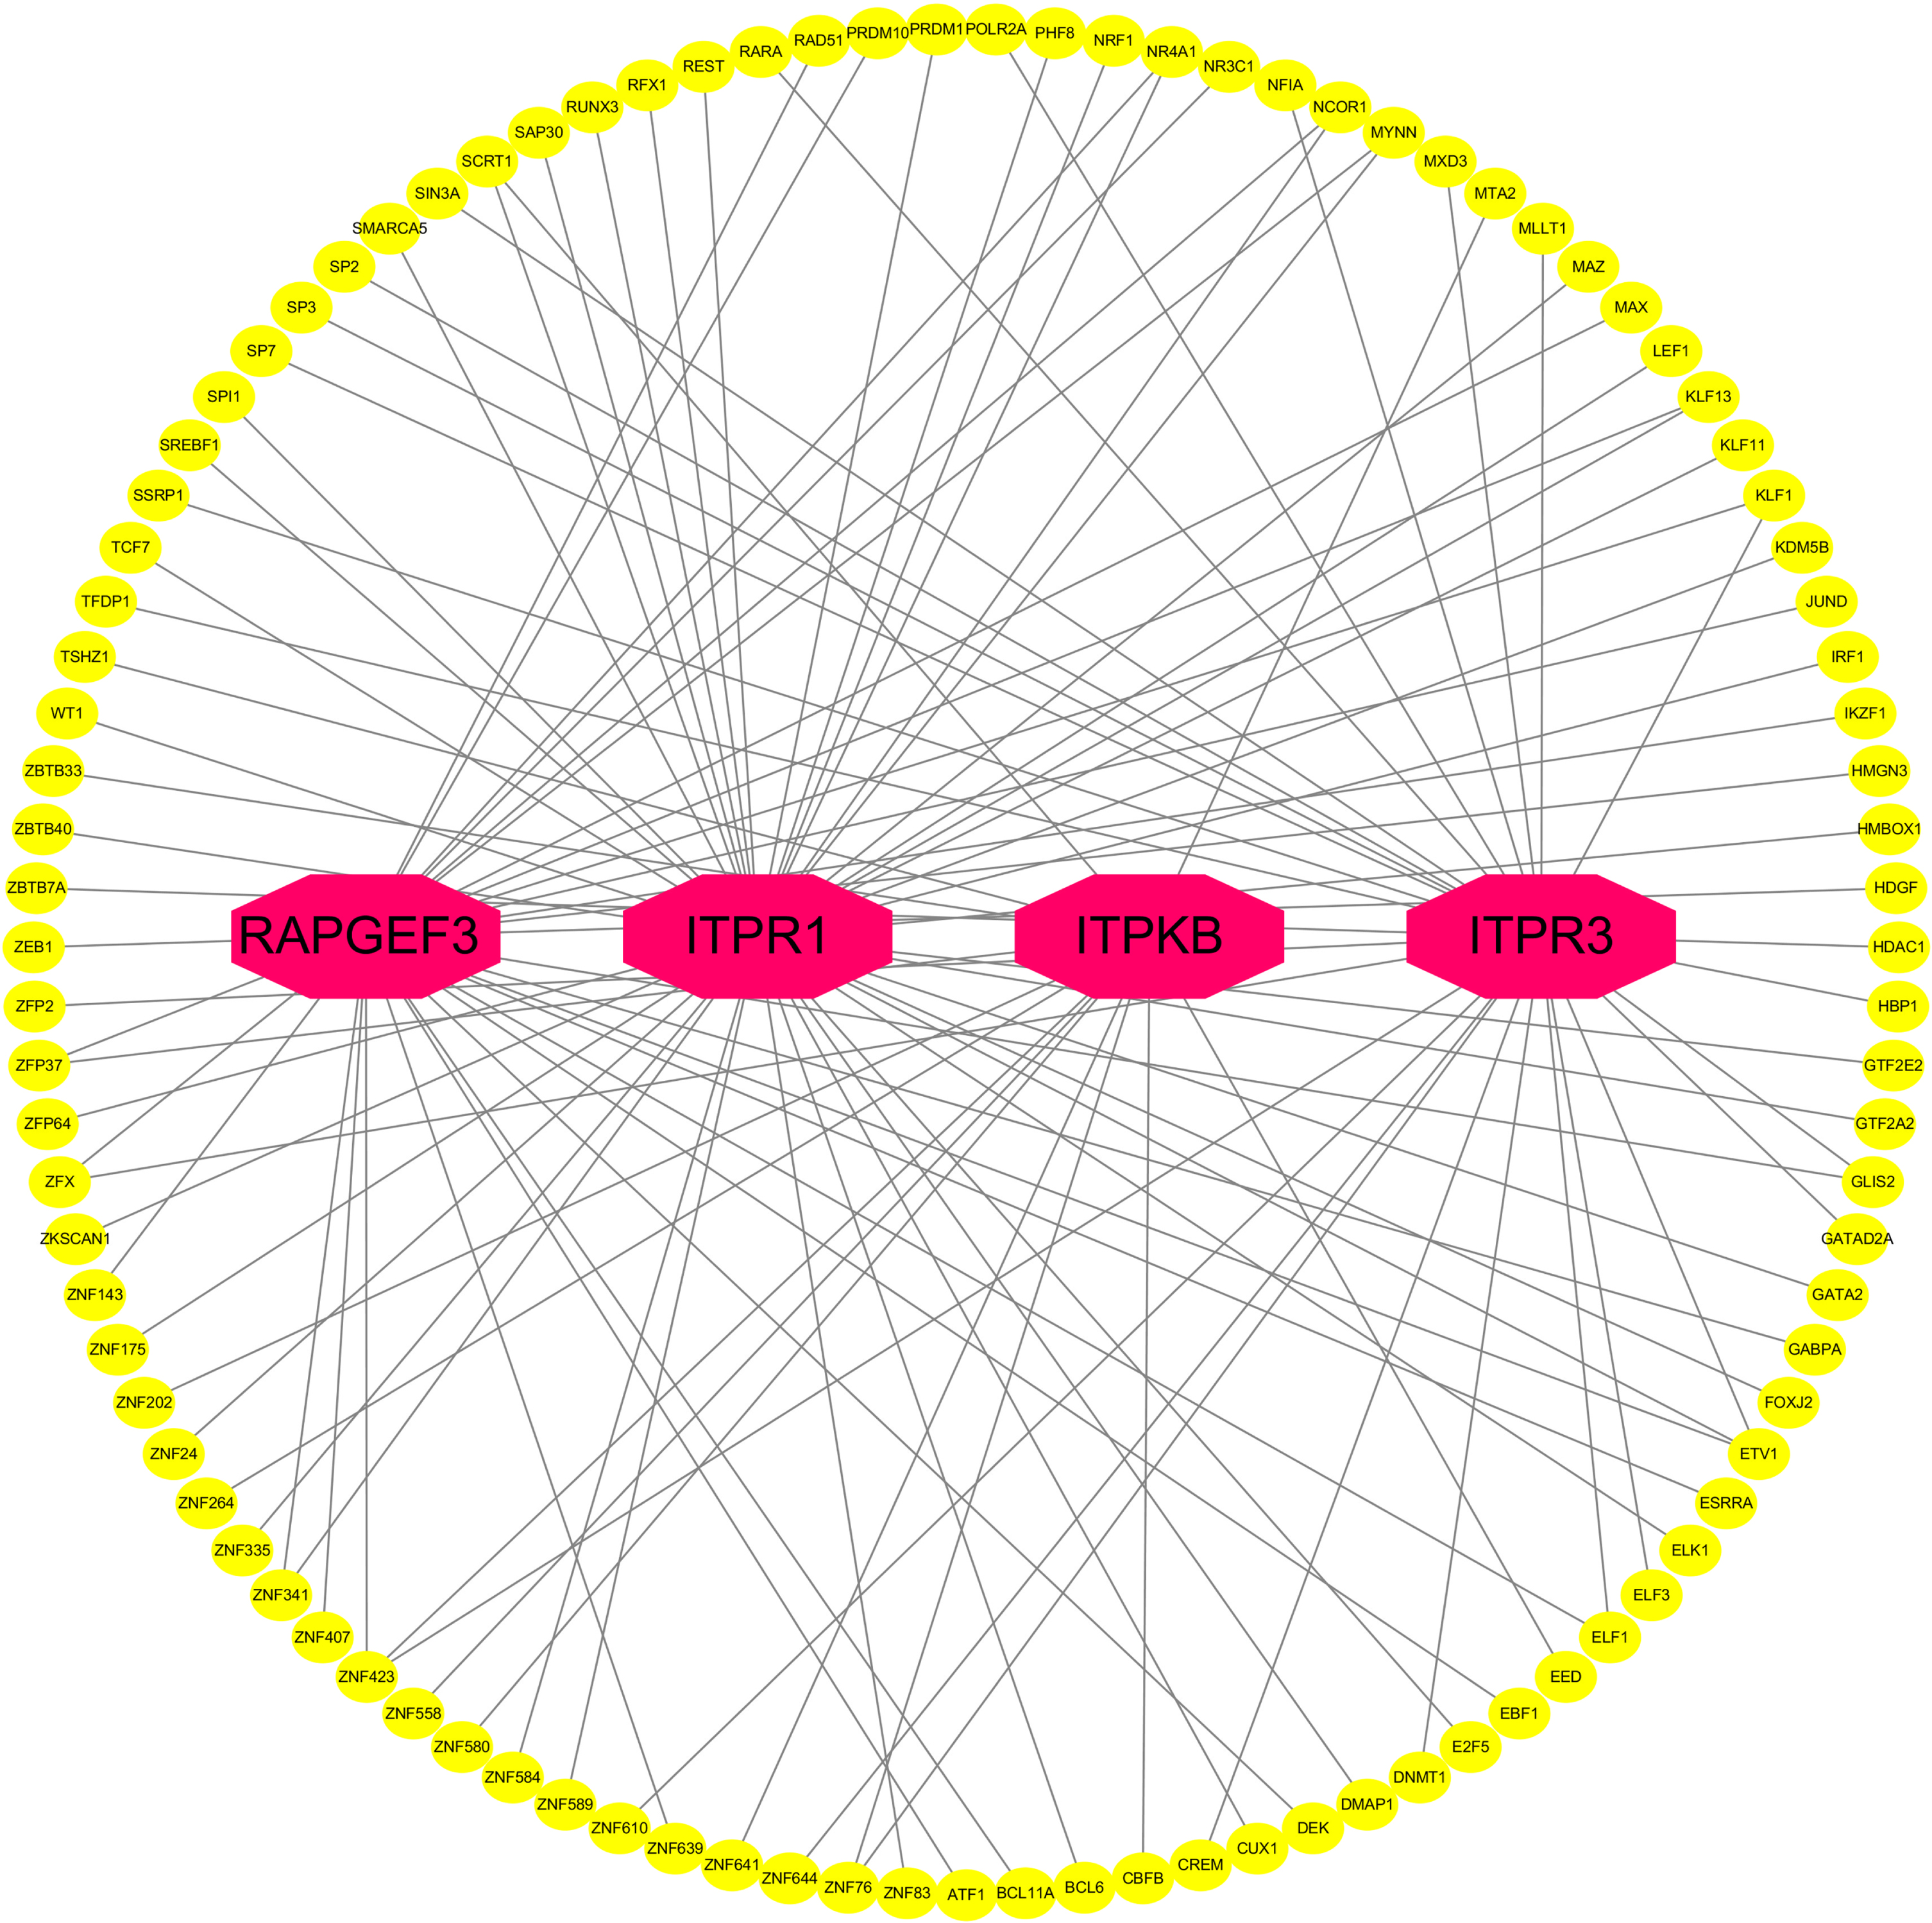 Network of TF-gene interactions with 4 hub genes. The red node represents the hub genes, yellow node represents TF-genes.